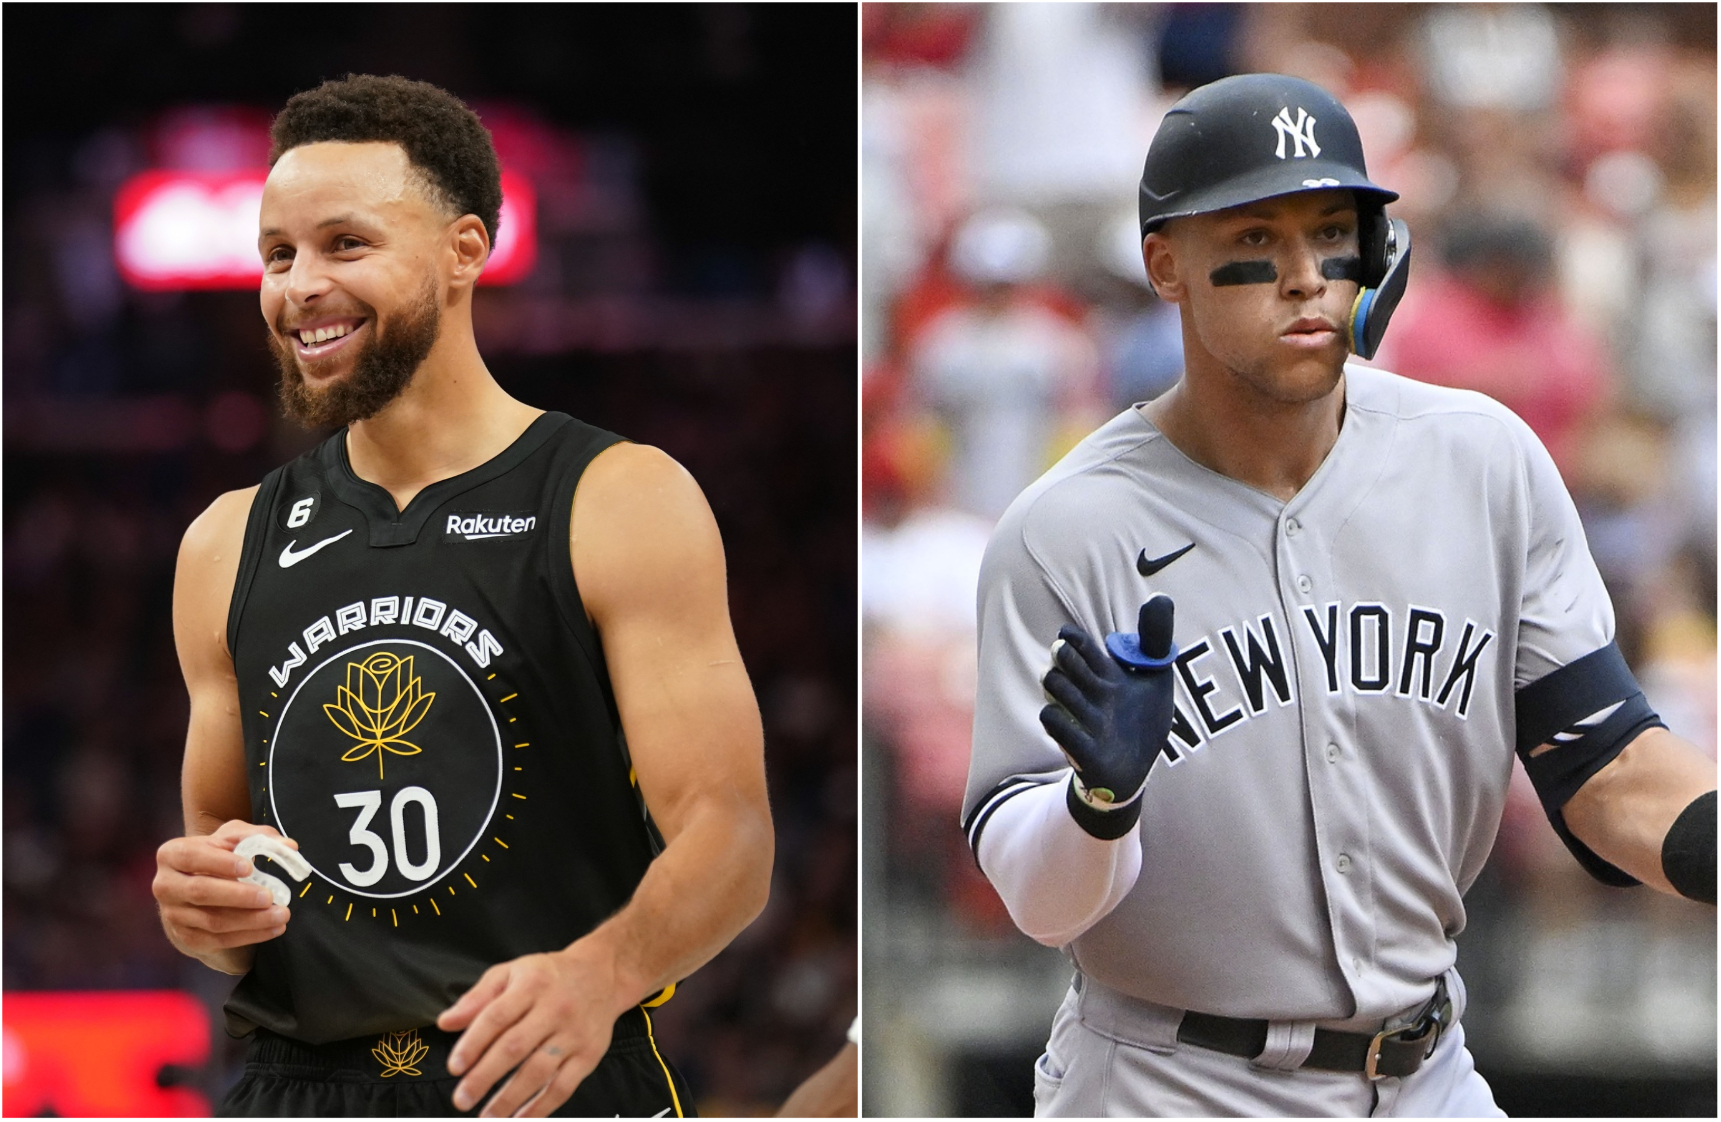 Stephen Curry Comments on Recruiting Aaron Judge to Giants